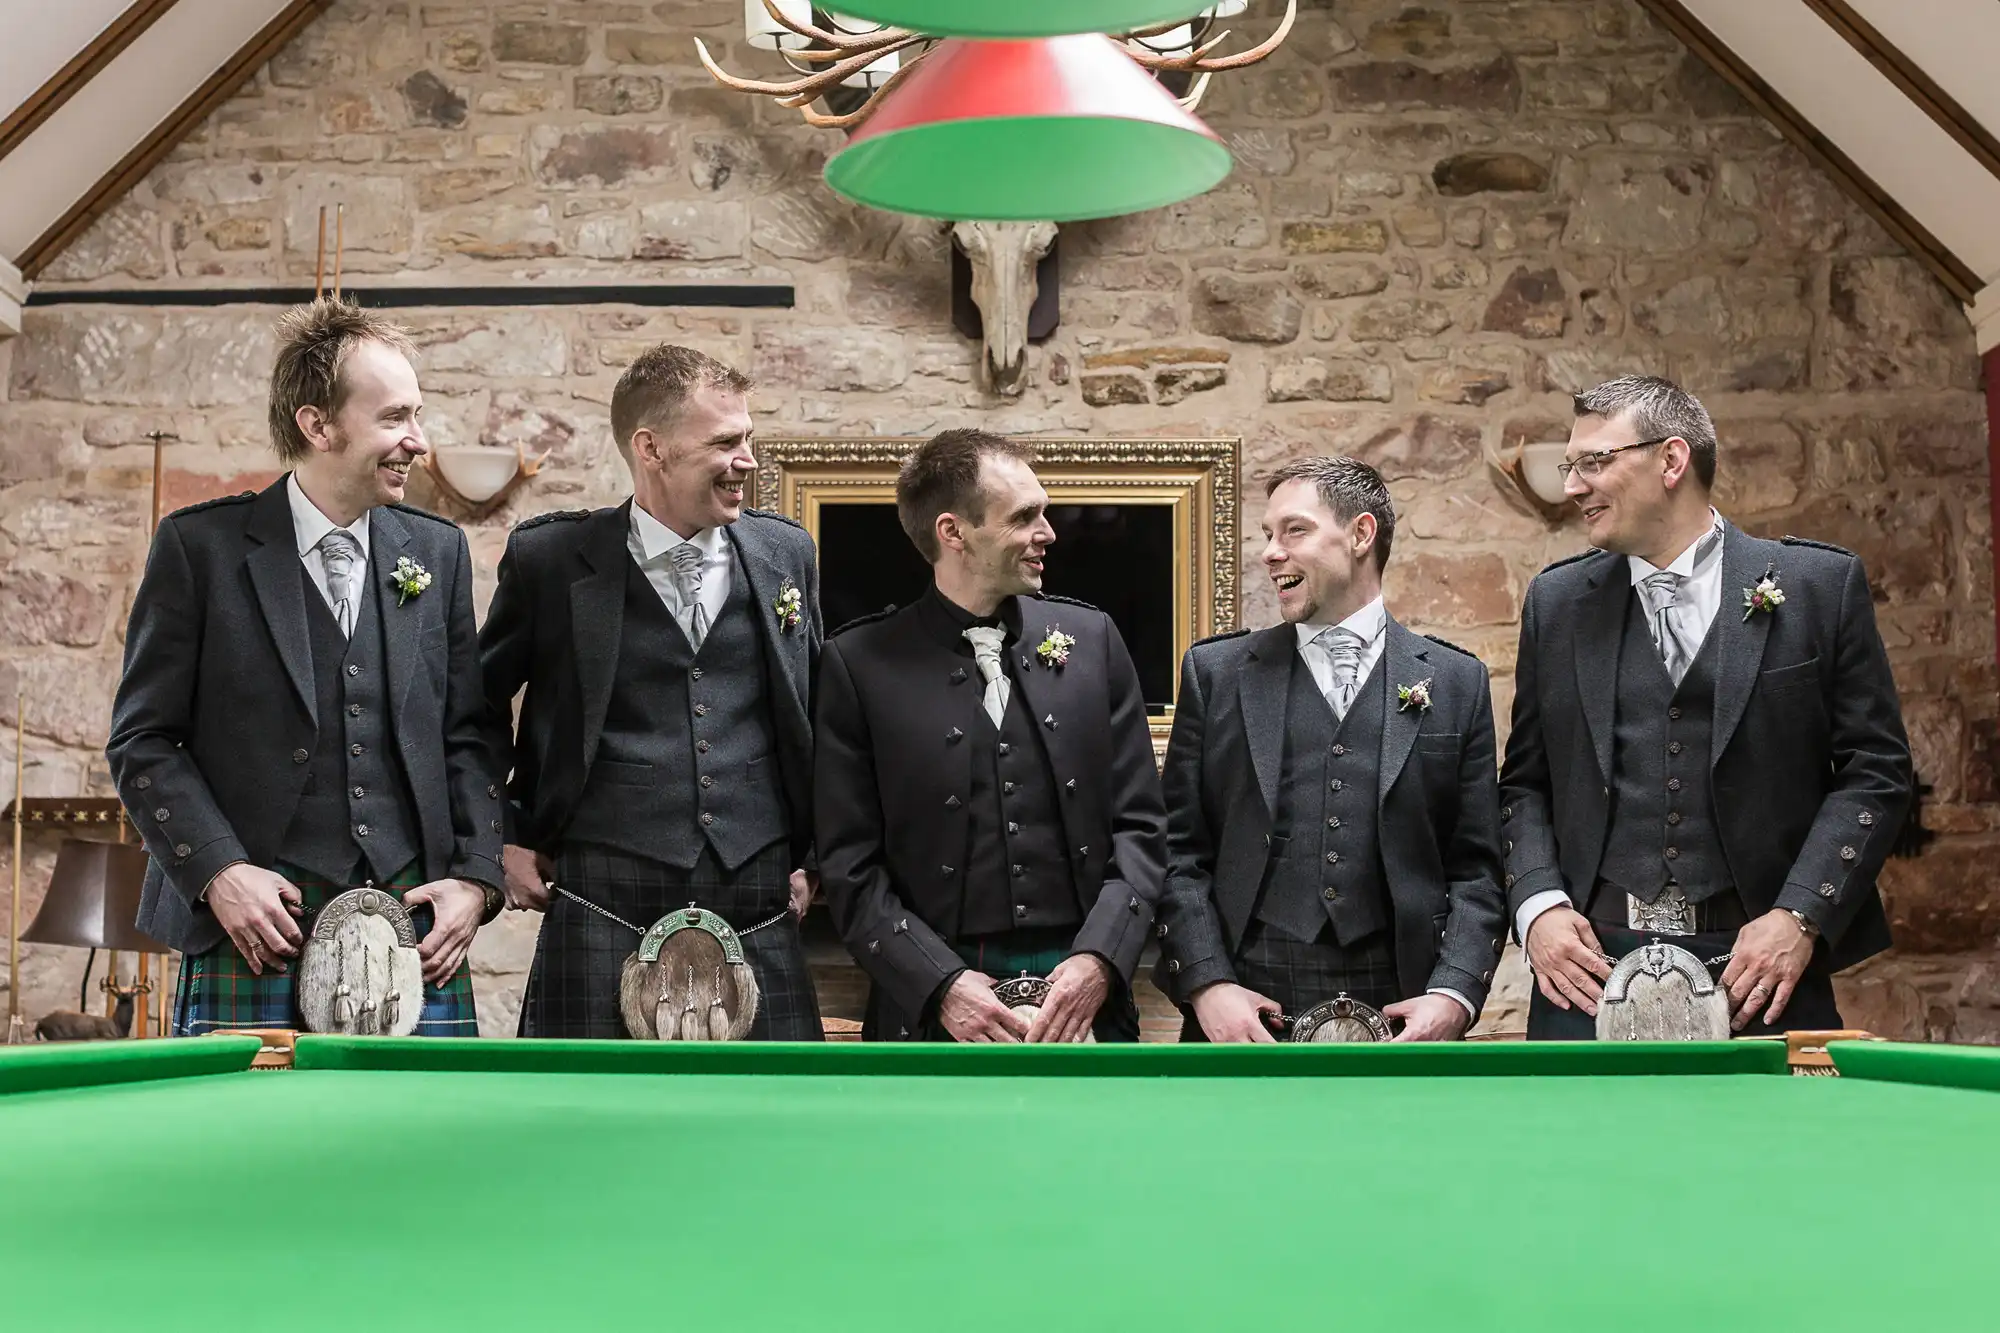 Five men in suits and kilts standing and laughing around a green billiards table in a rustic room with a stone wall backdrop.